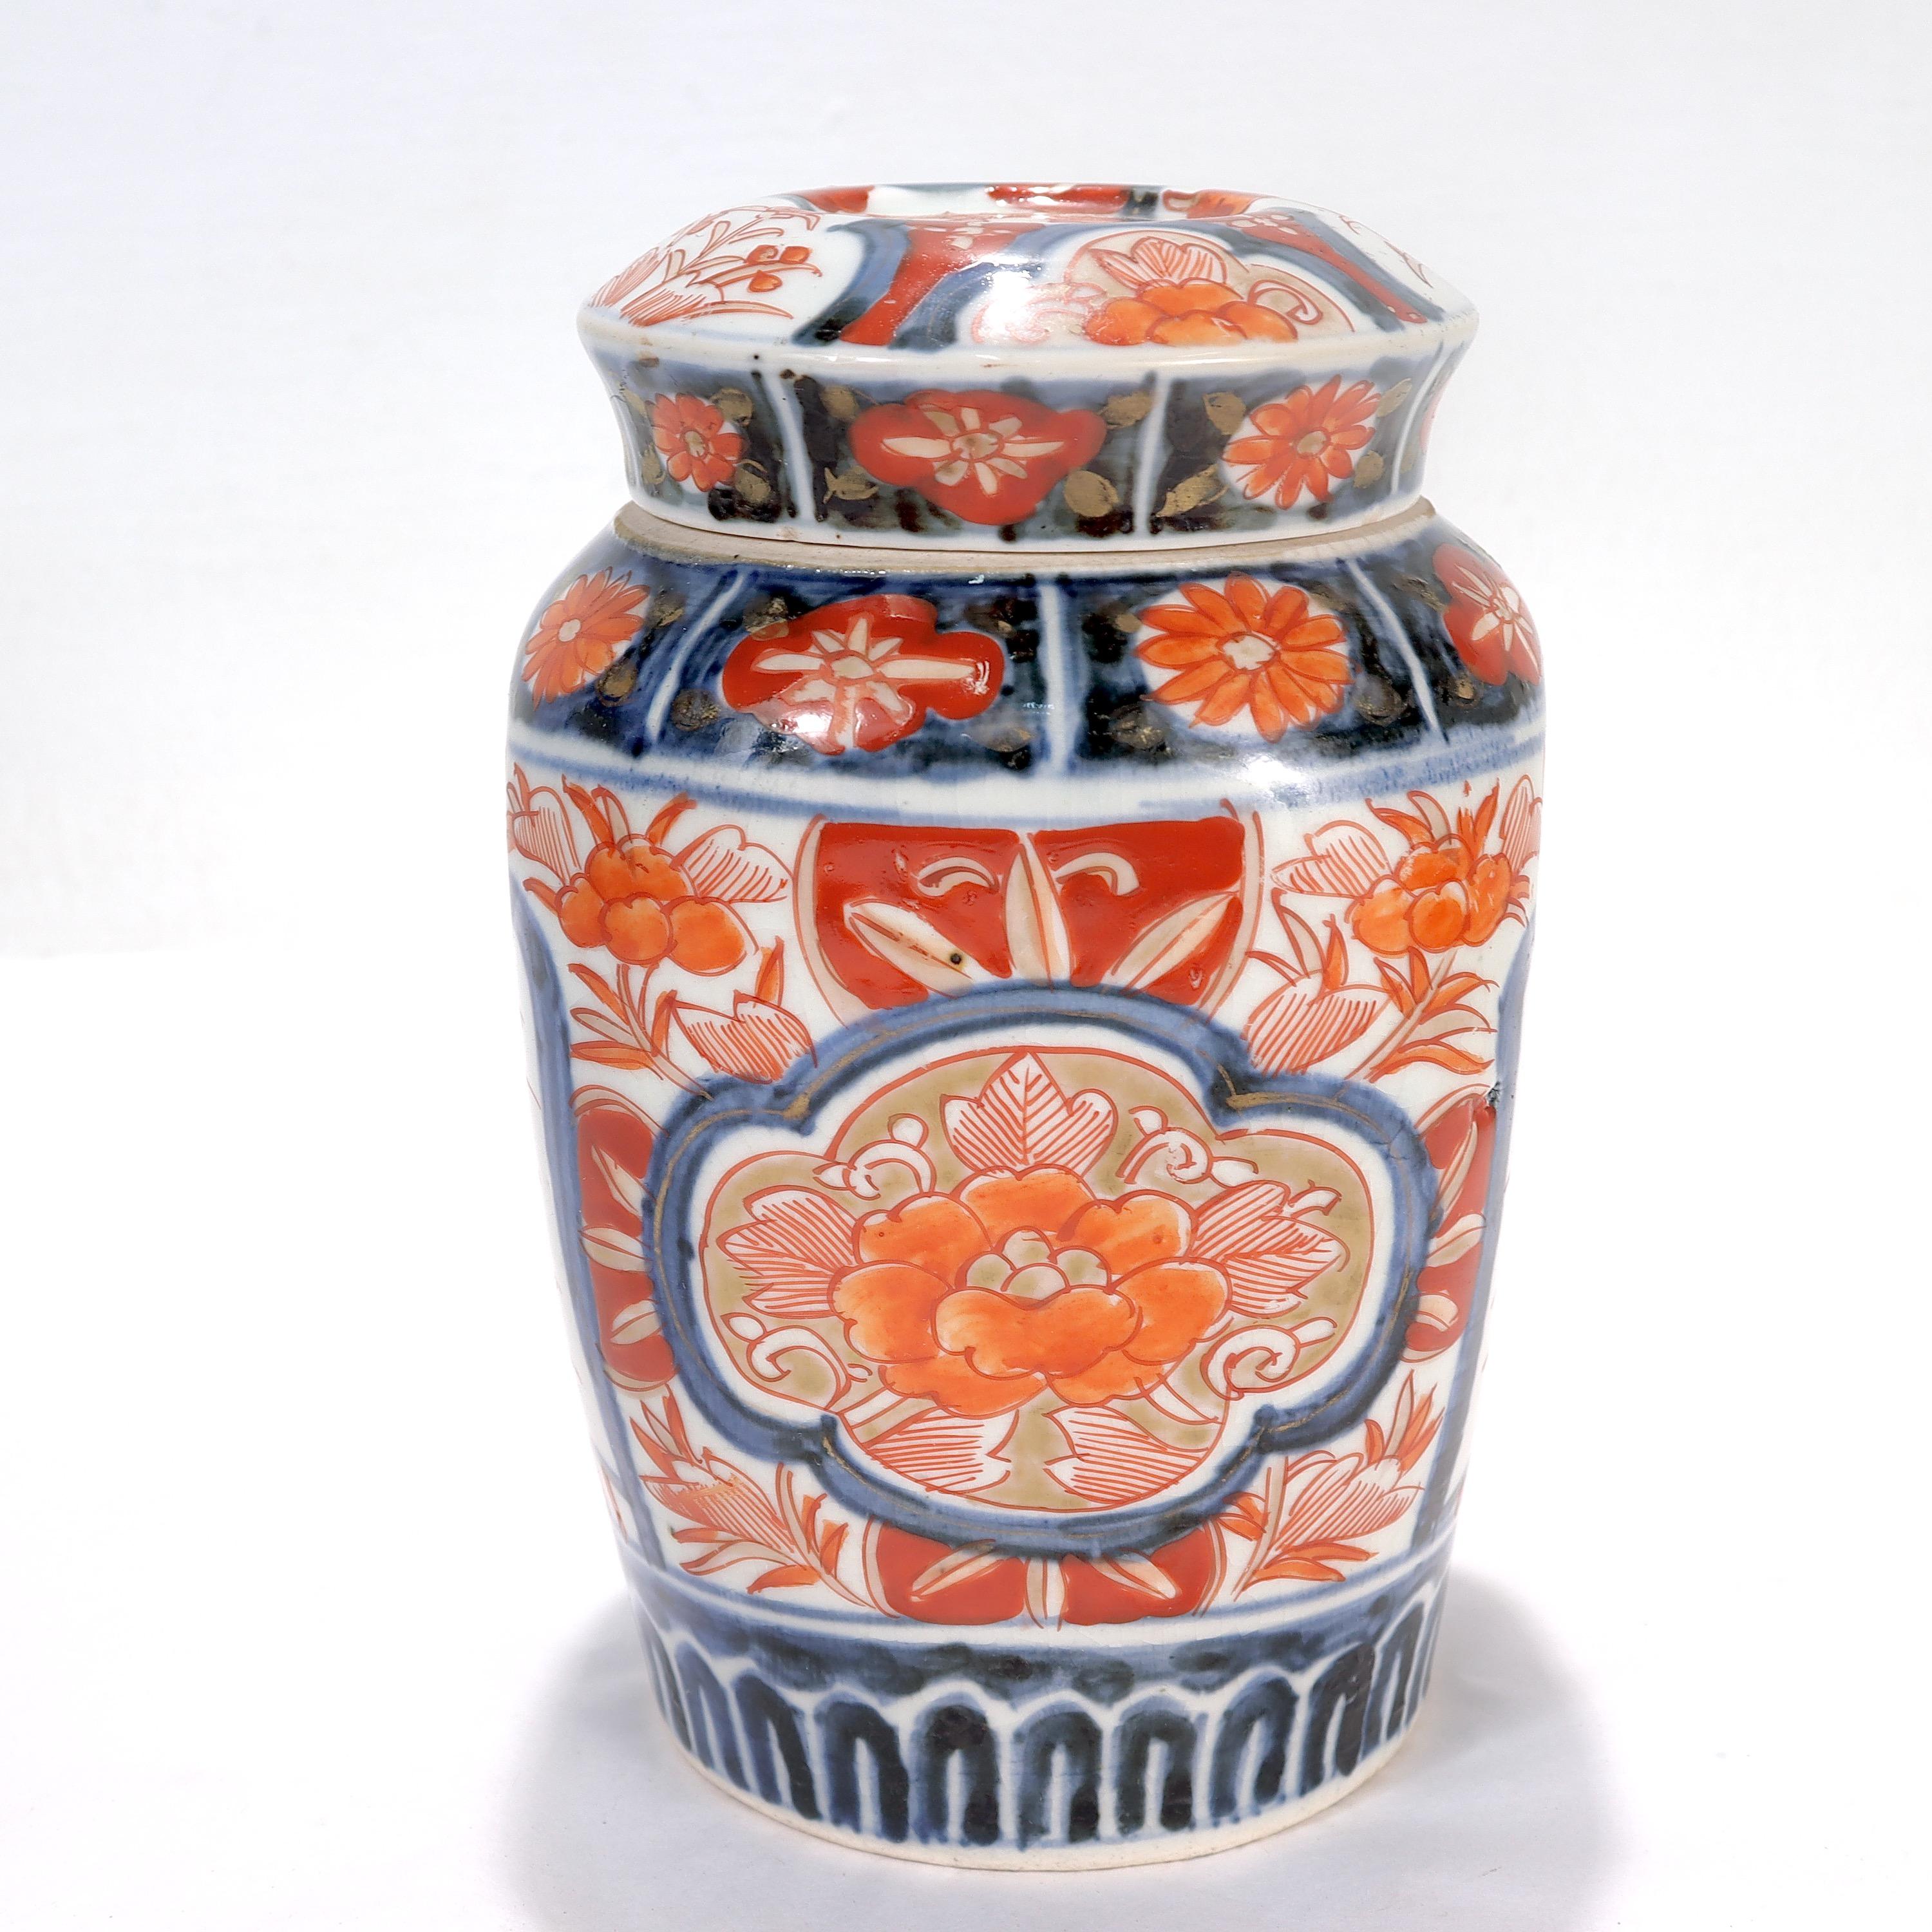 A fine Japanese Imari porcelain lidded jar or urn.

Decorated throughout with painted red floral devices with blue underglaze and gilt highlights against a white ground.

Simply a wonderful Imari porcelain jar!

Date:
20th century or